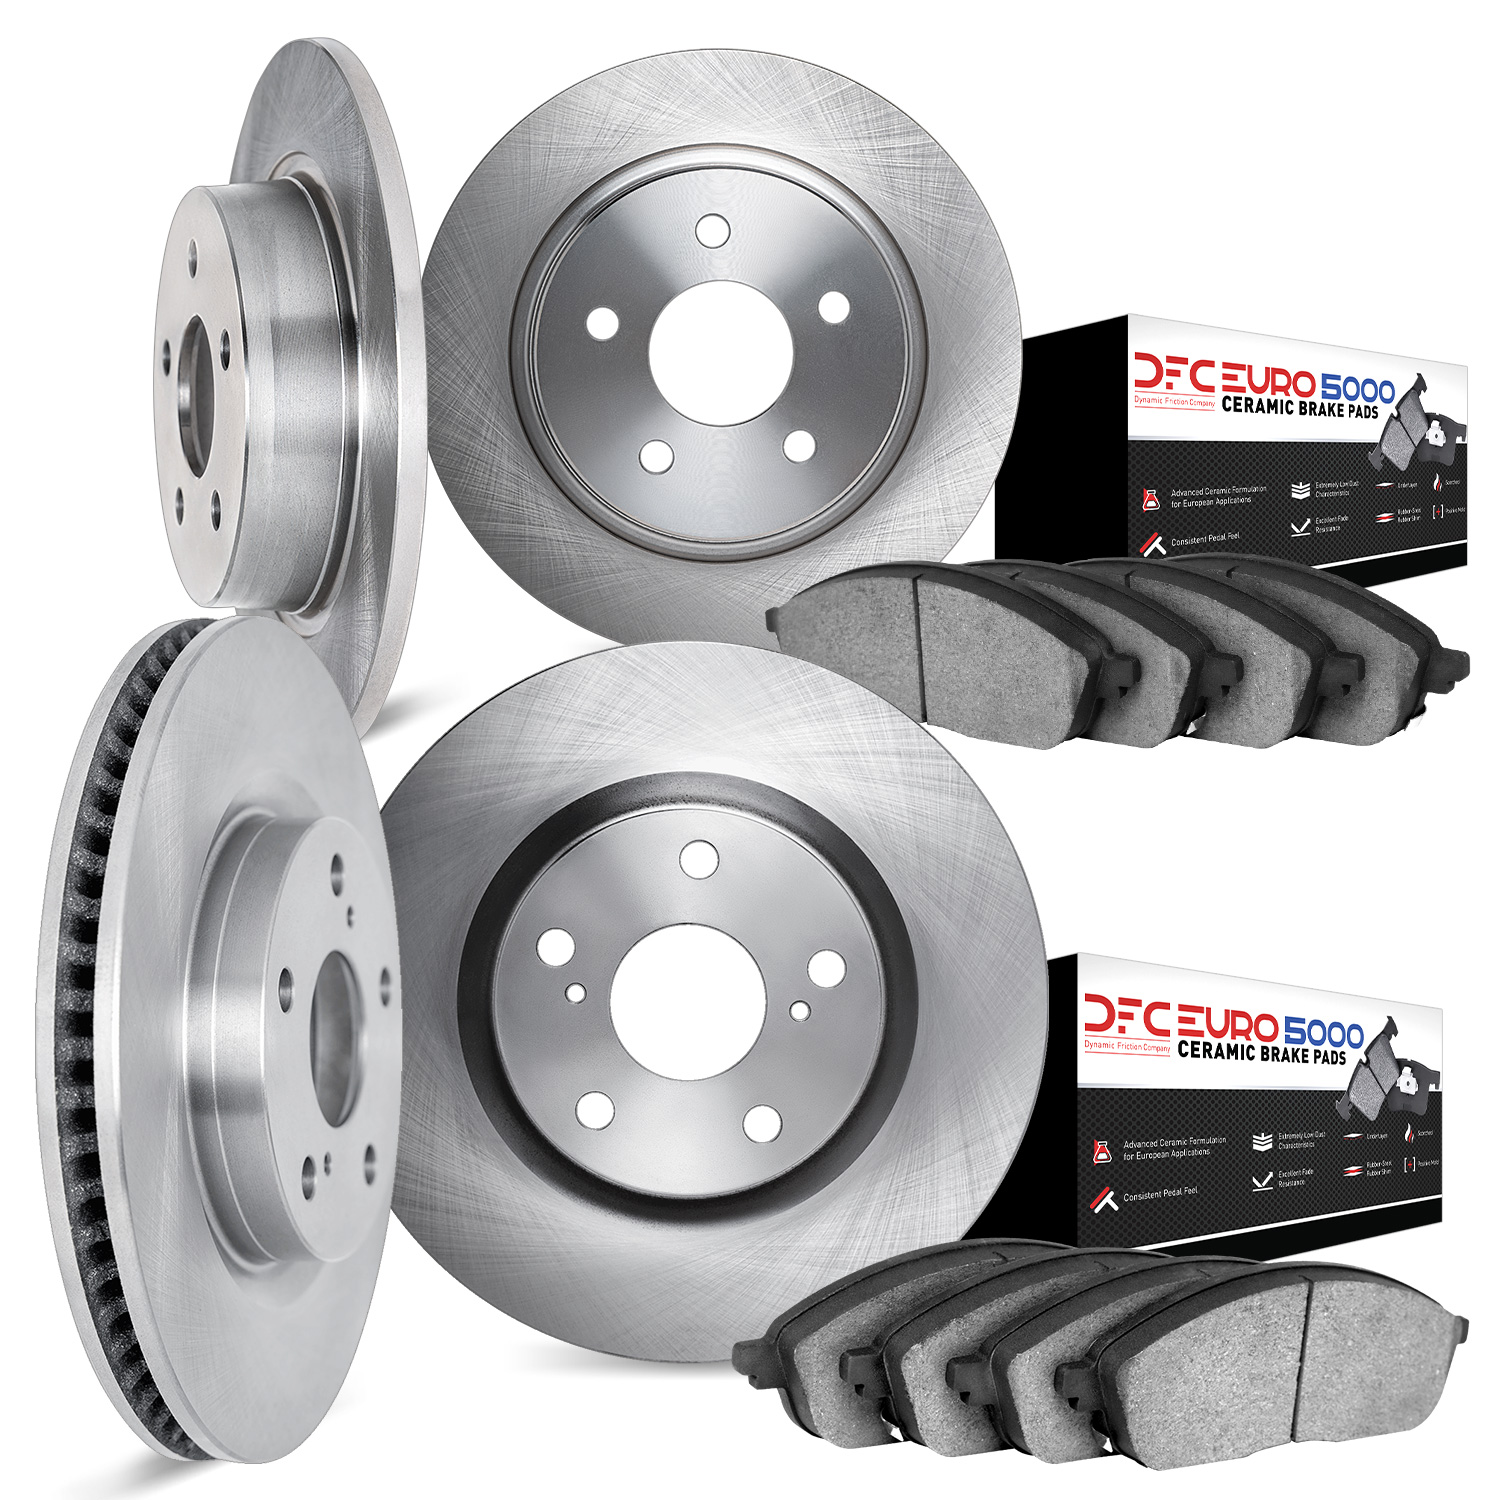 6604-31005 Brake Rotors w/5000 Euro Ceramic Brake Pads, 1987-1992 BMW, Position: Front and Rear